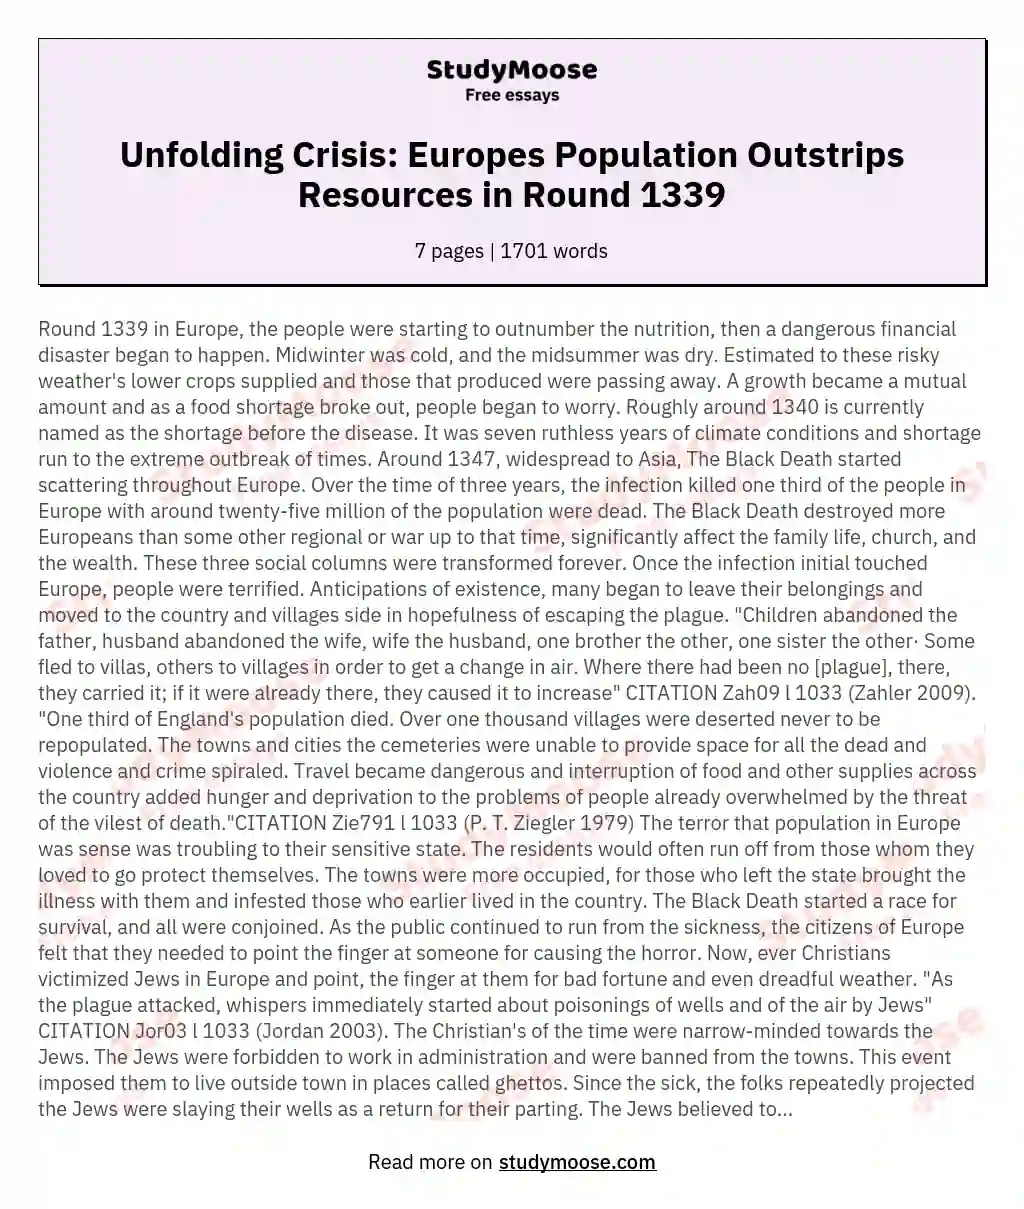 Unfolding Crisis: Europes Population Outstrips Resources in Round 1339 essay